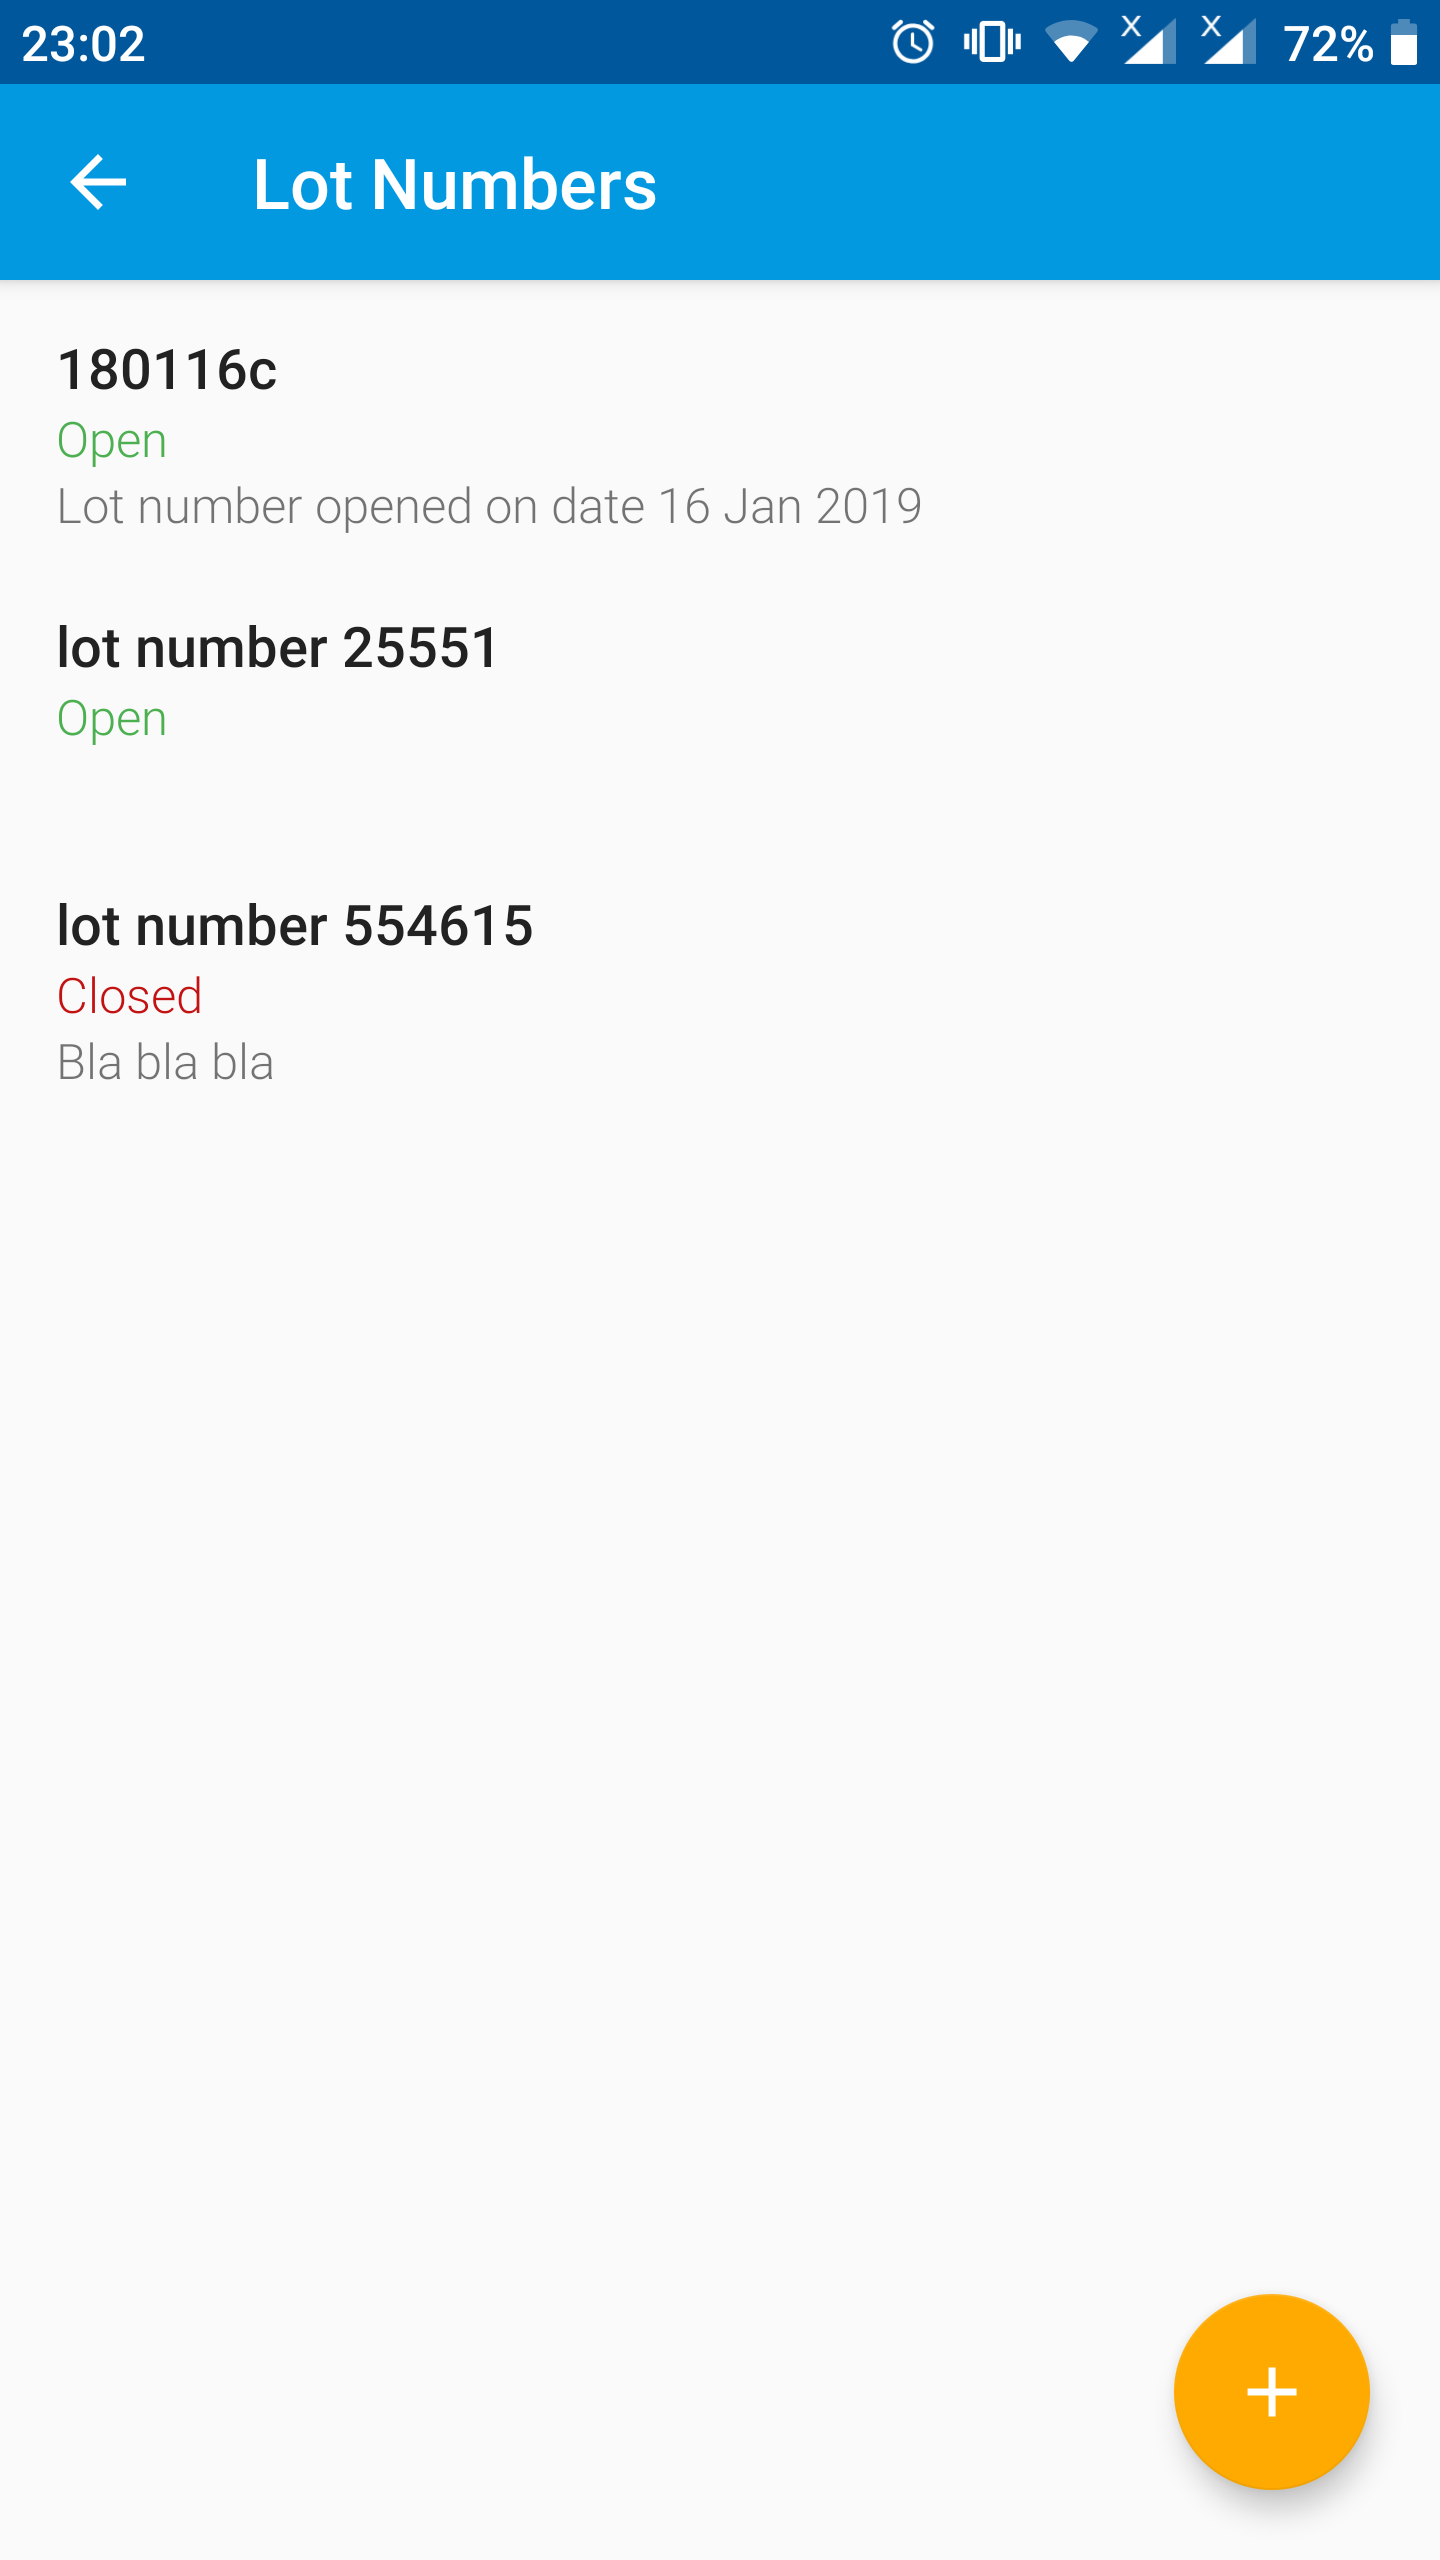 Lot numbers